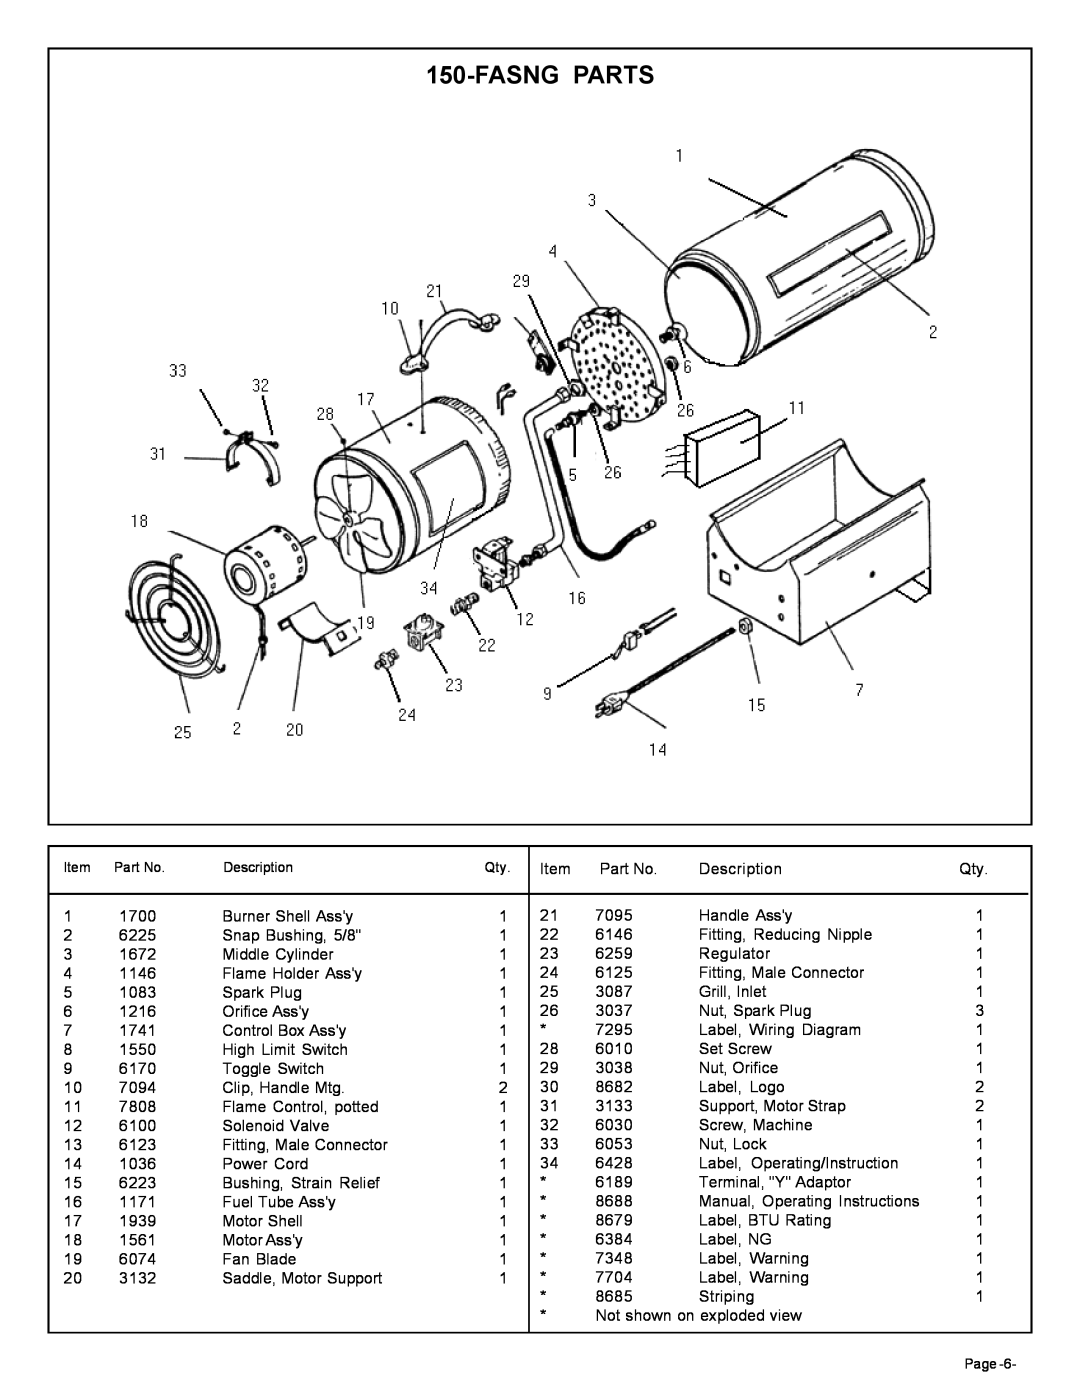 Universal 150-FASNG owner manual Fasng Parts 